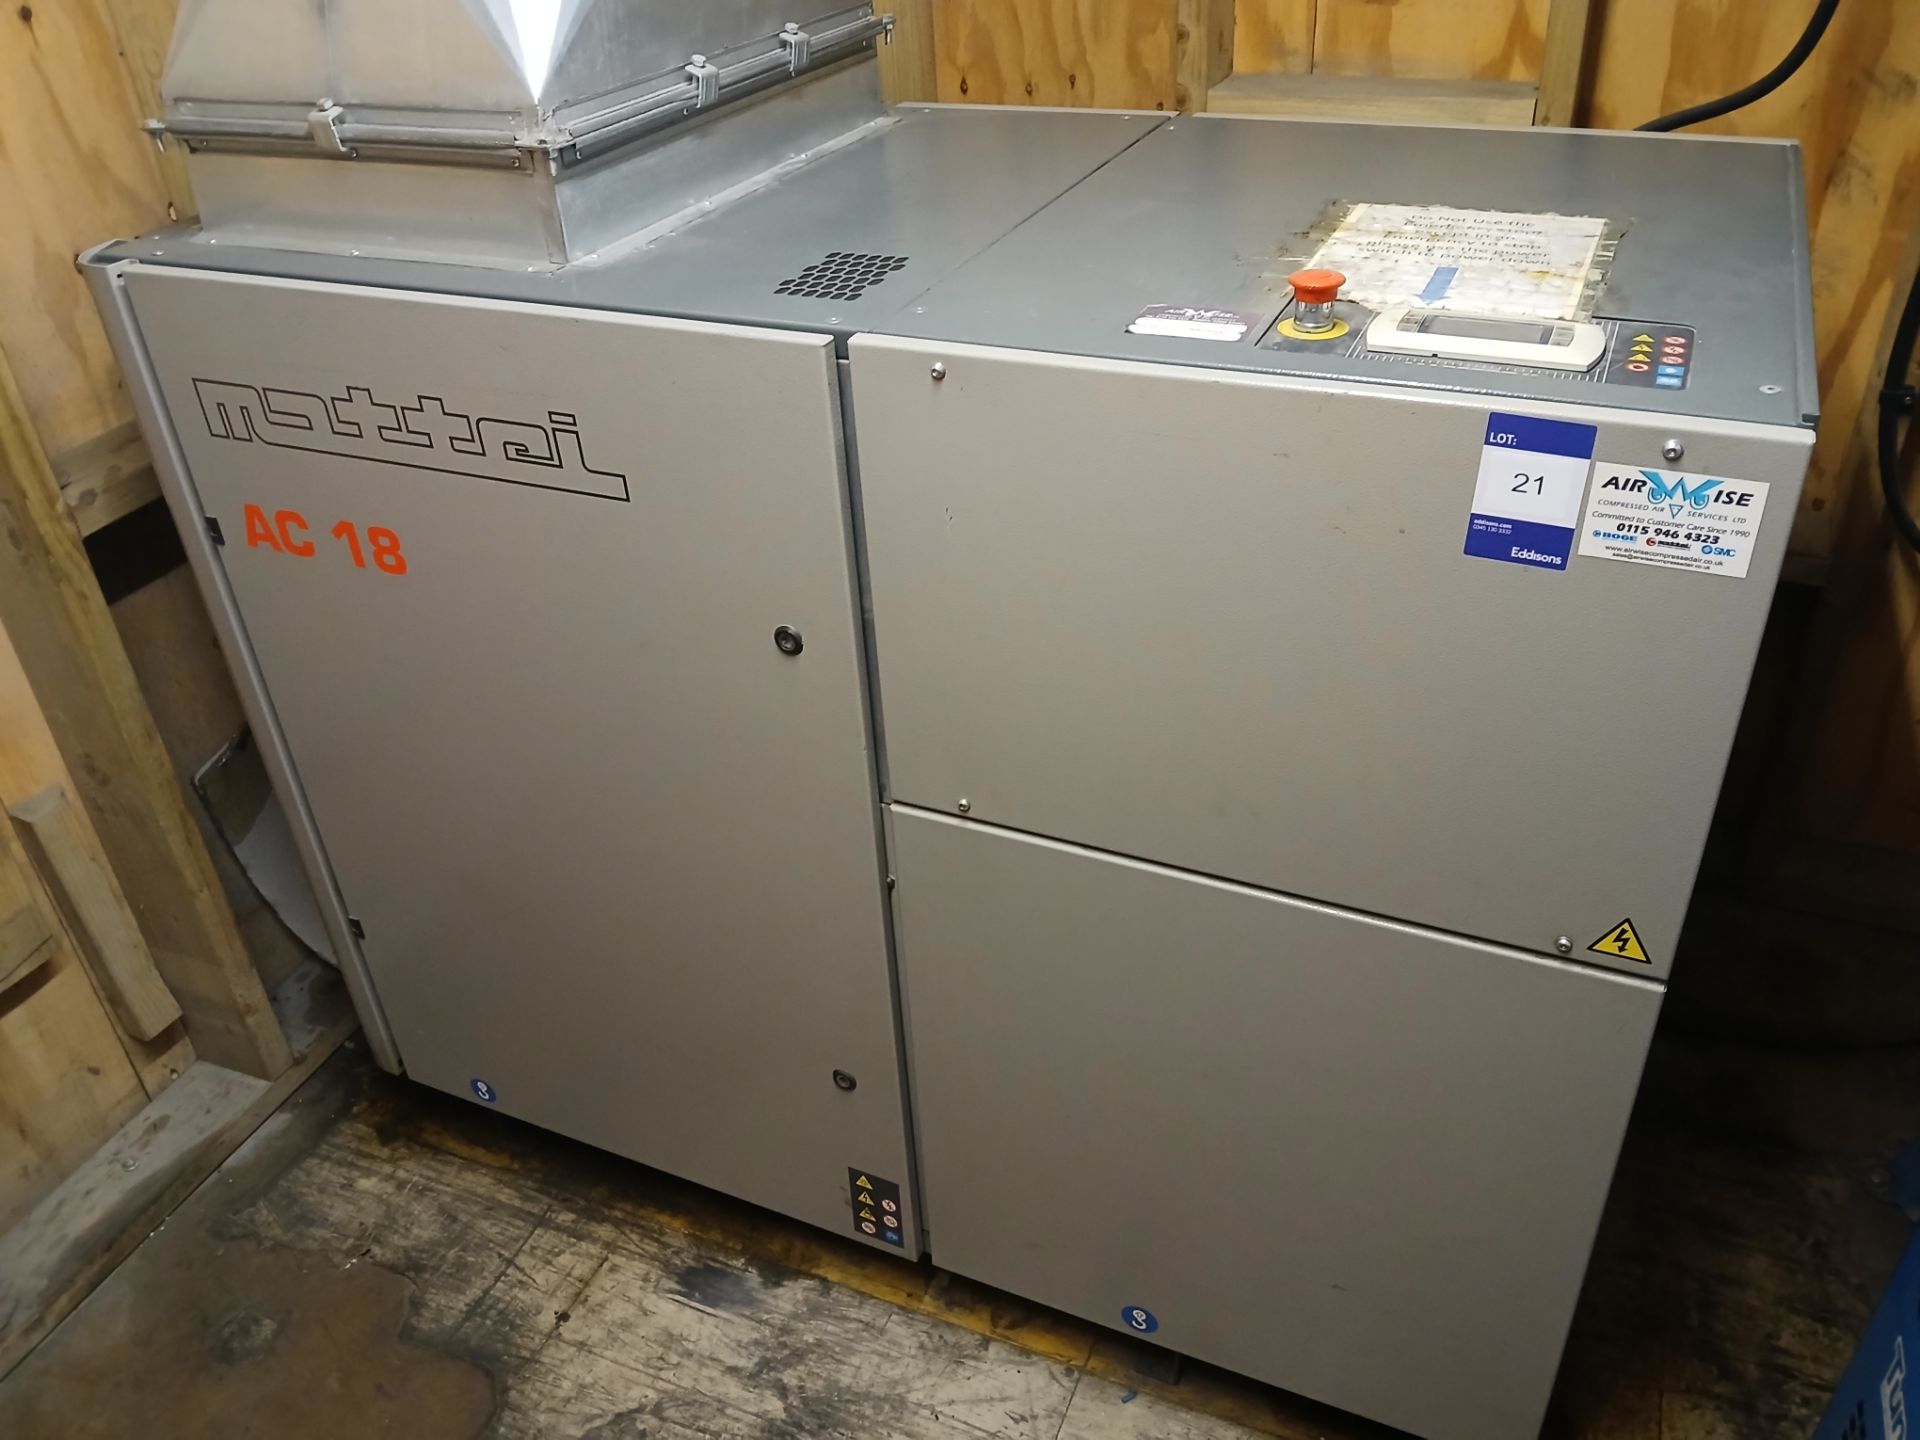 Mattei AC18 packaged air compressor, Serial Number and Year unknown, 27,872 running hours